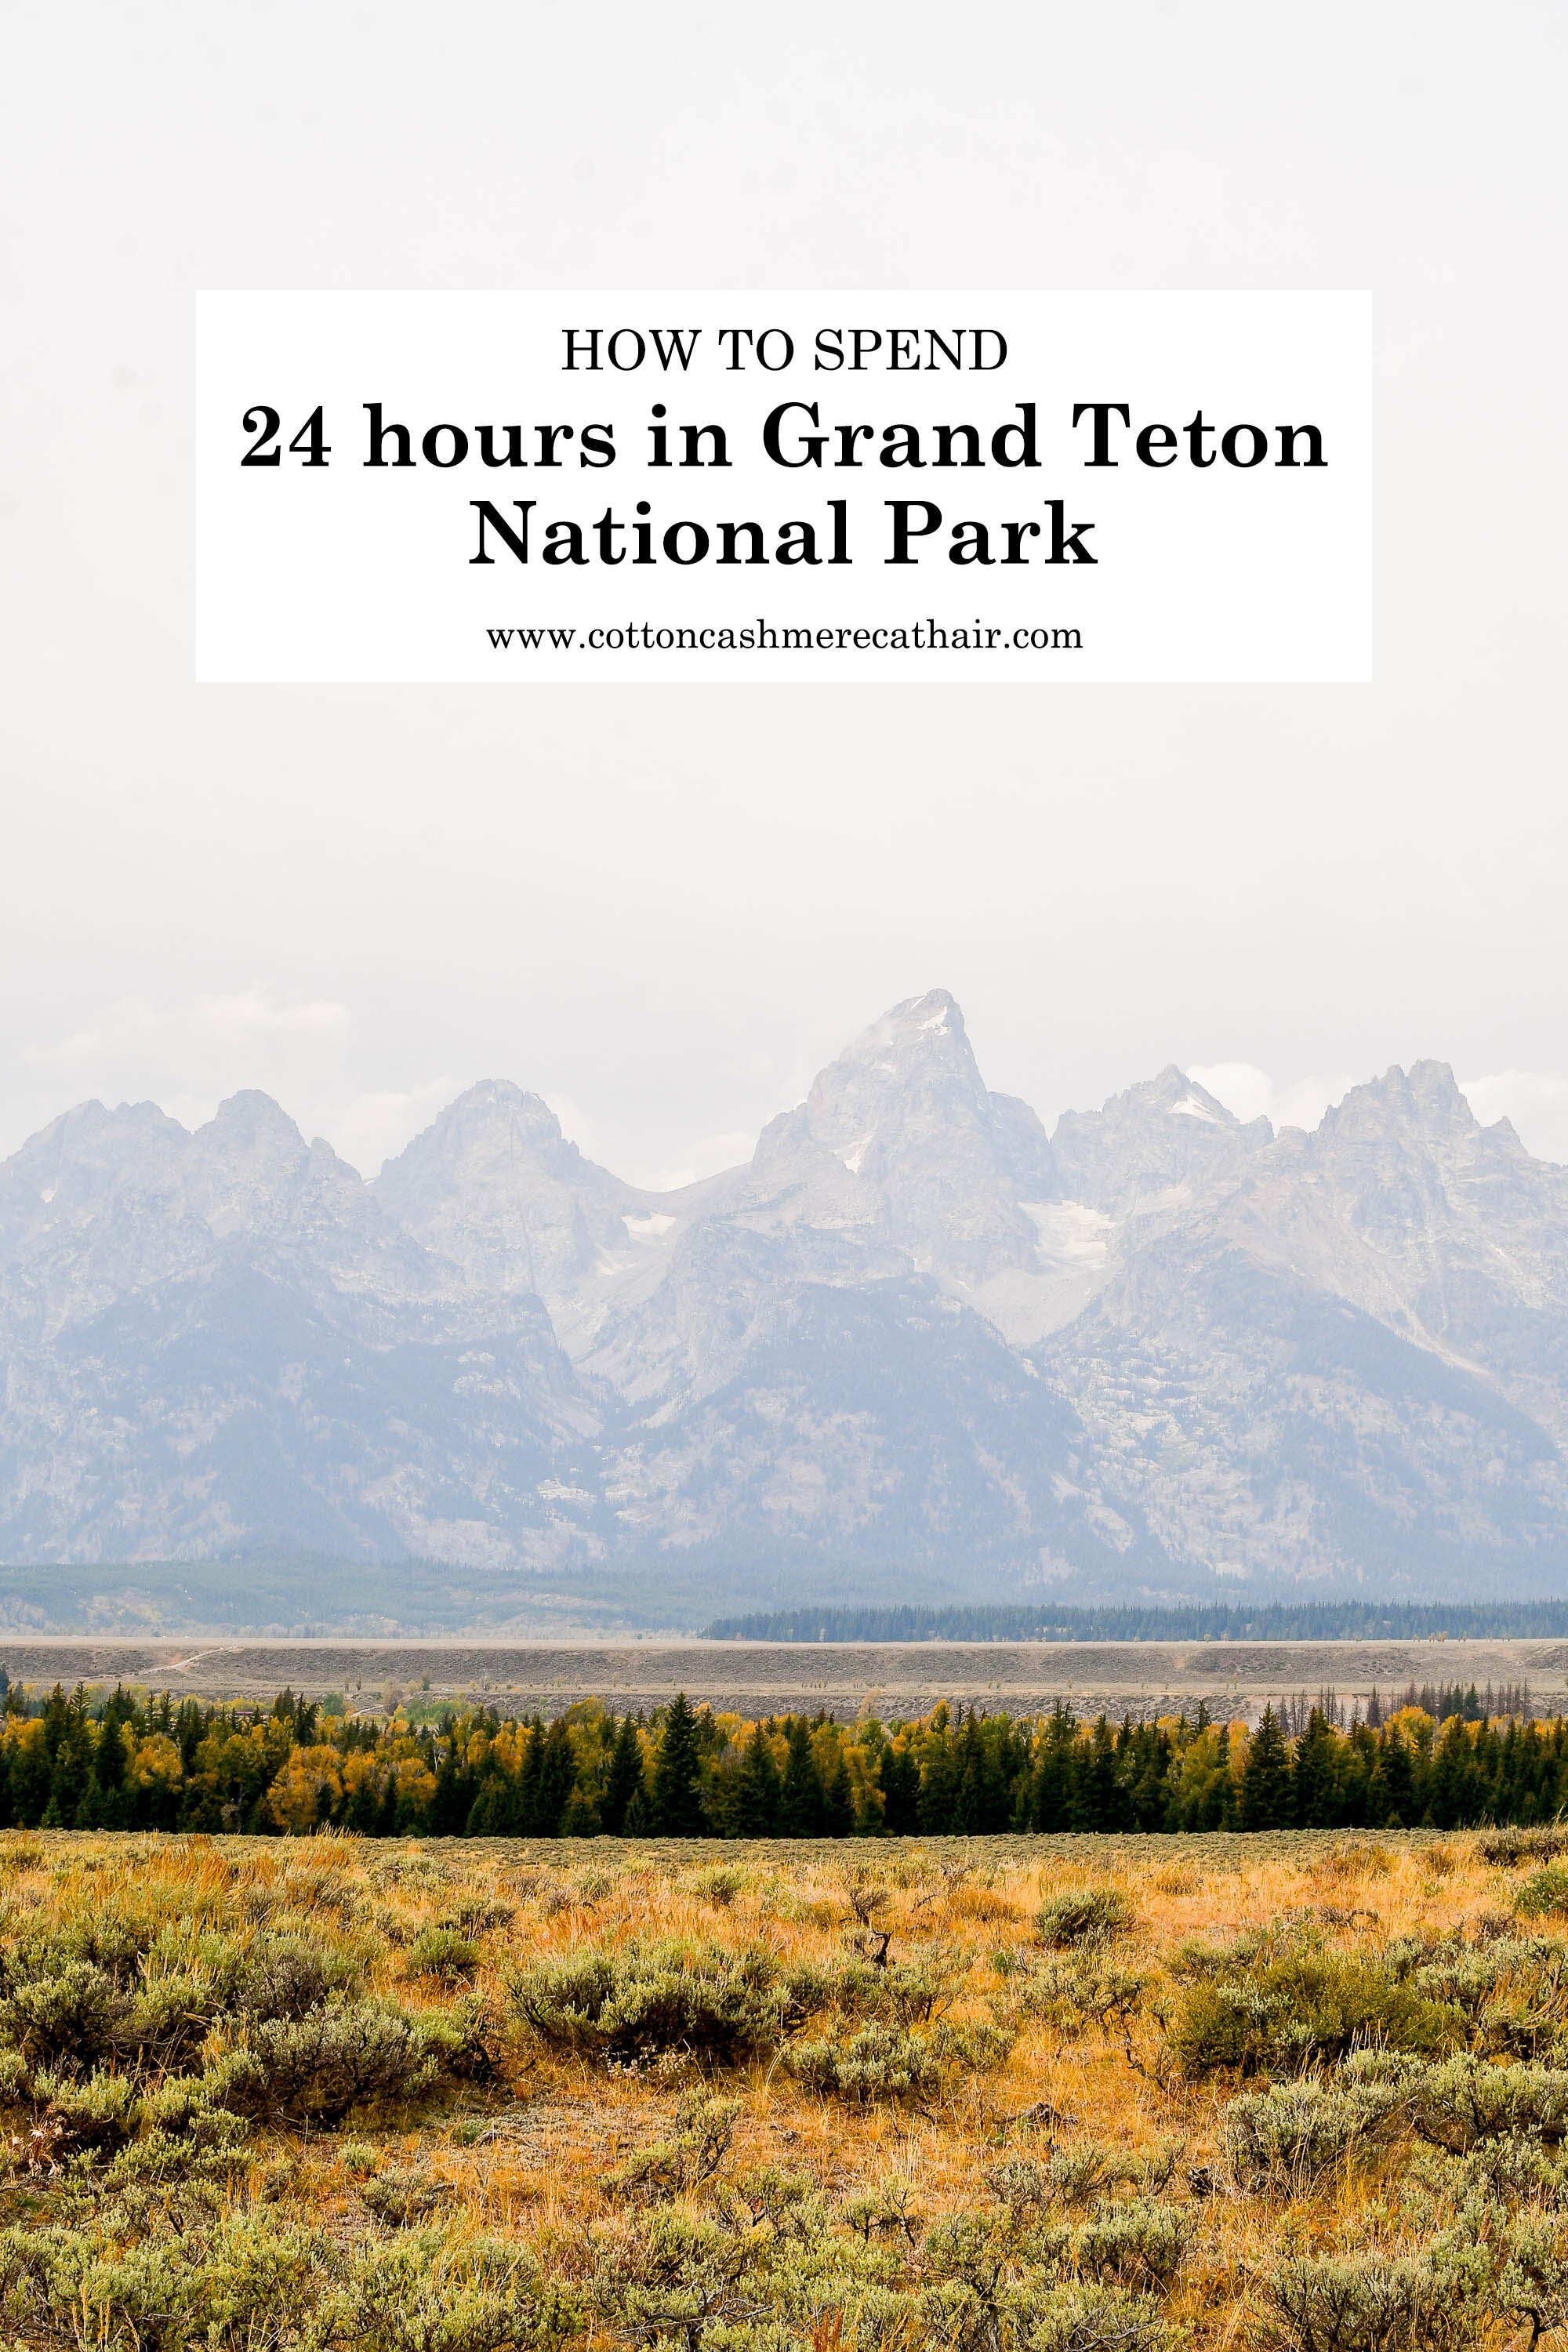 2020 travel: 24 hours in Grand Teton National Park — Cotton Cashmere Cat Hair